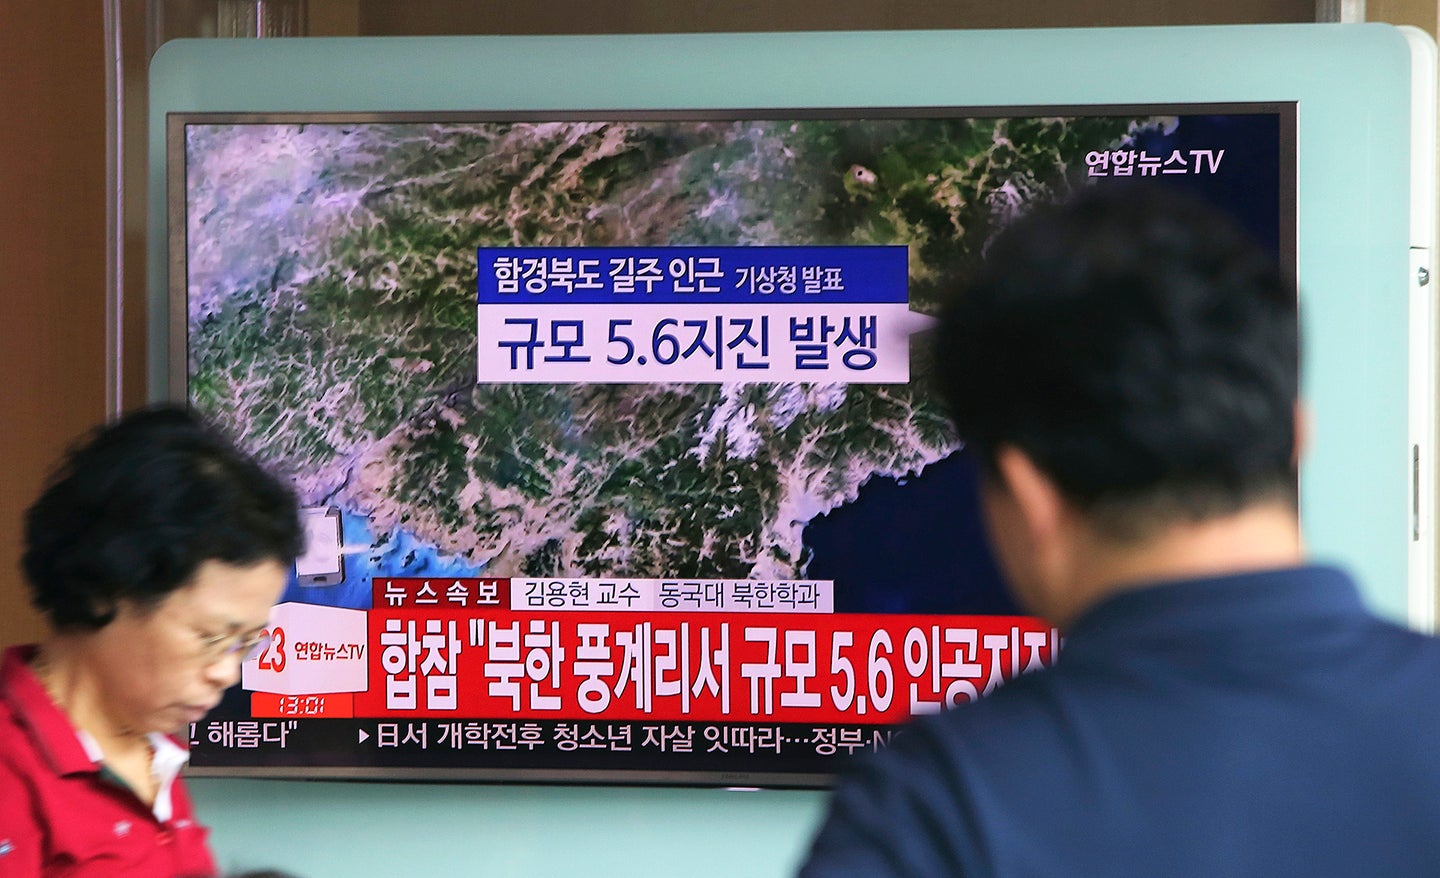 North Korea Has Executed Its Sixth Nuclear Test (Updating Live)